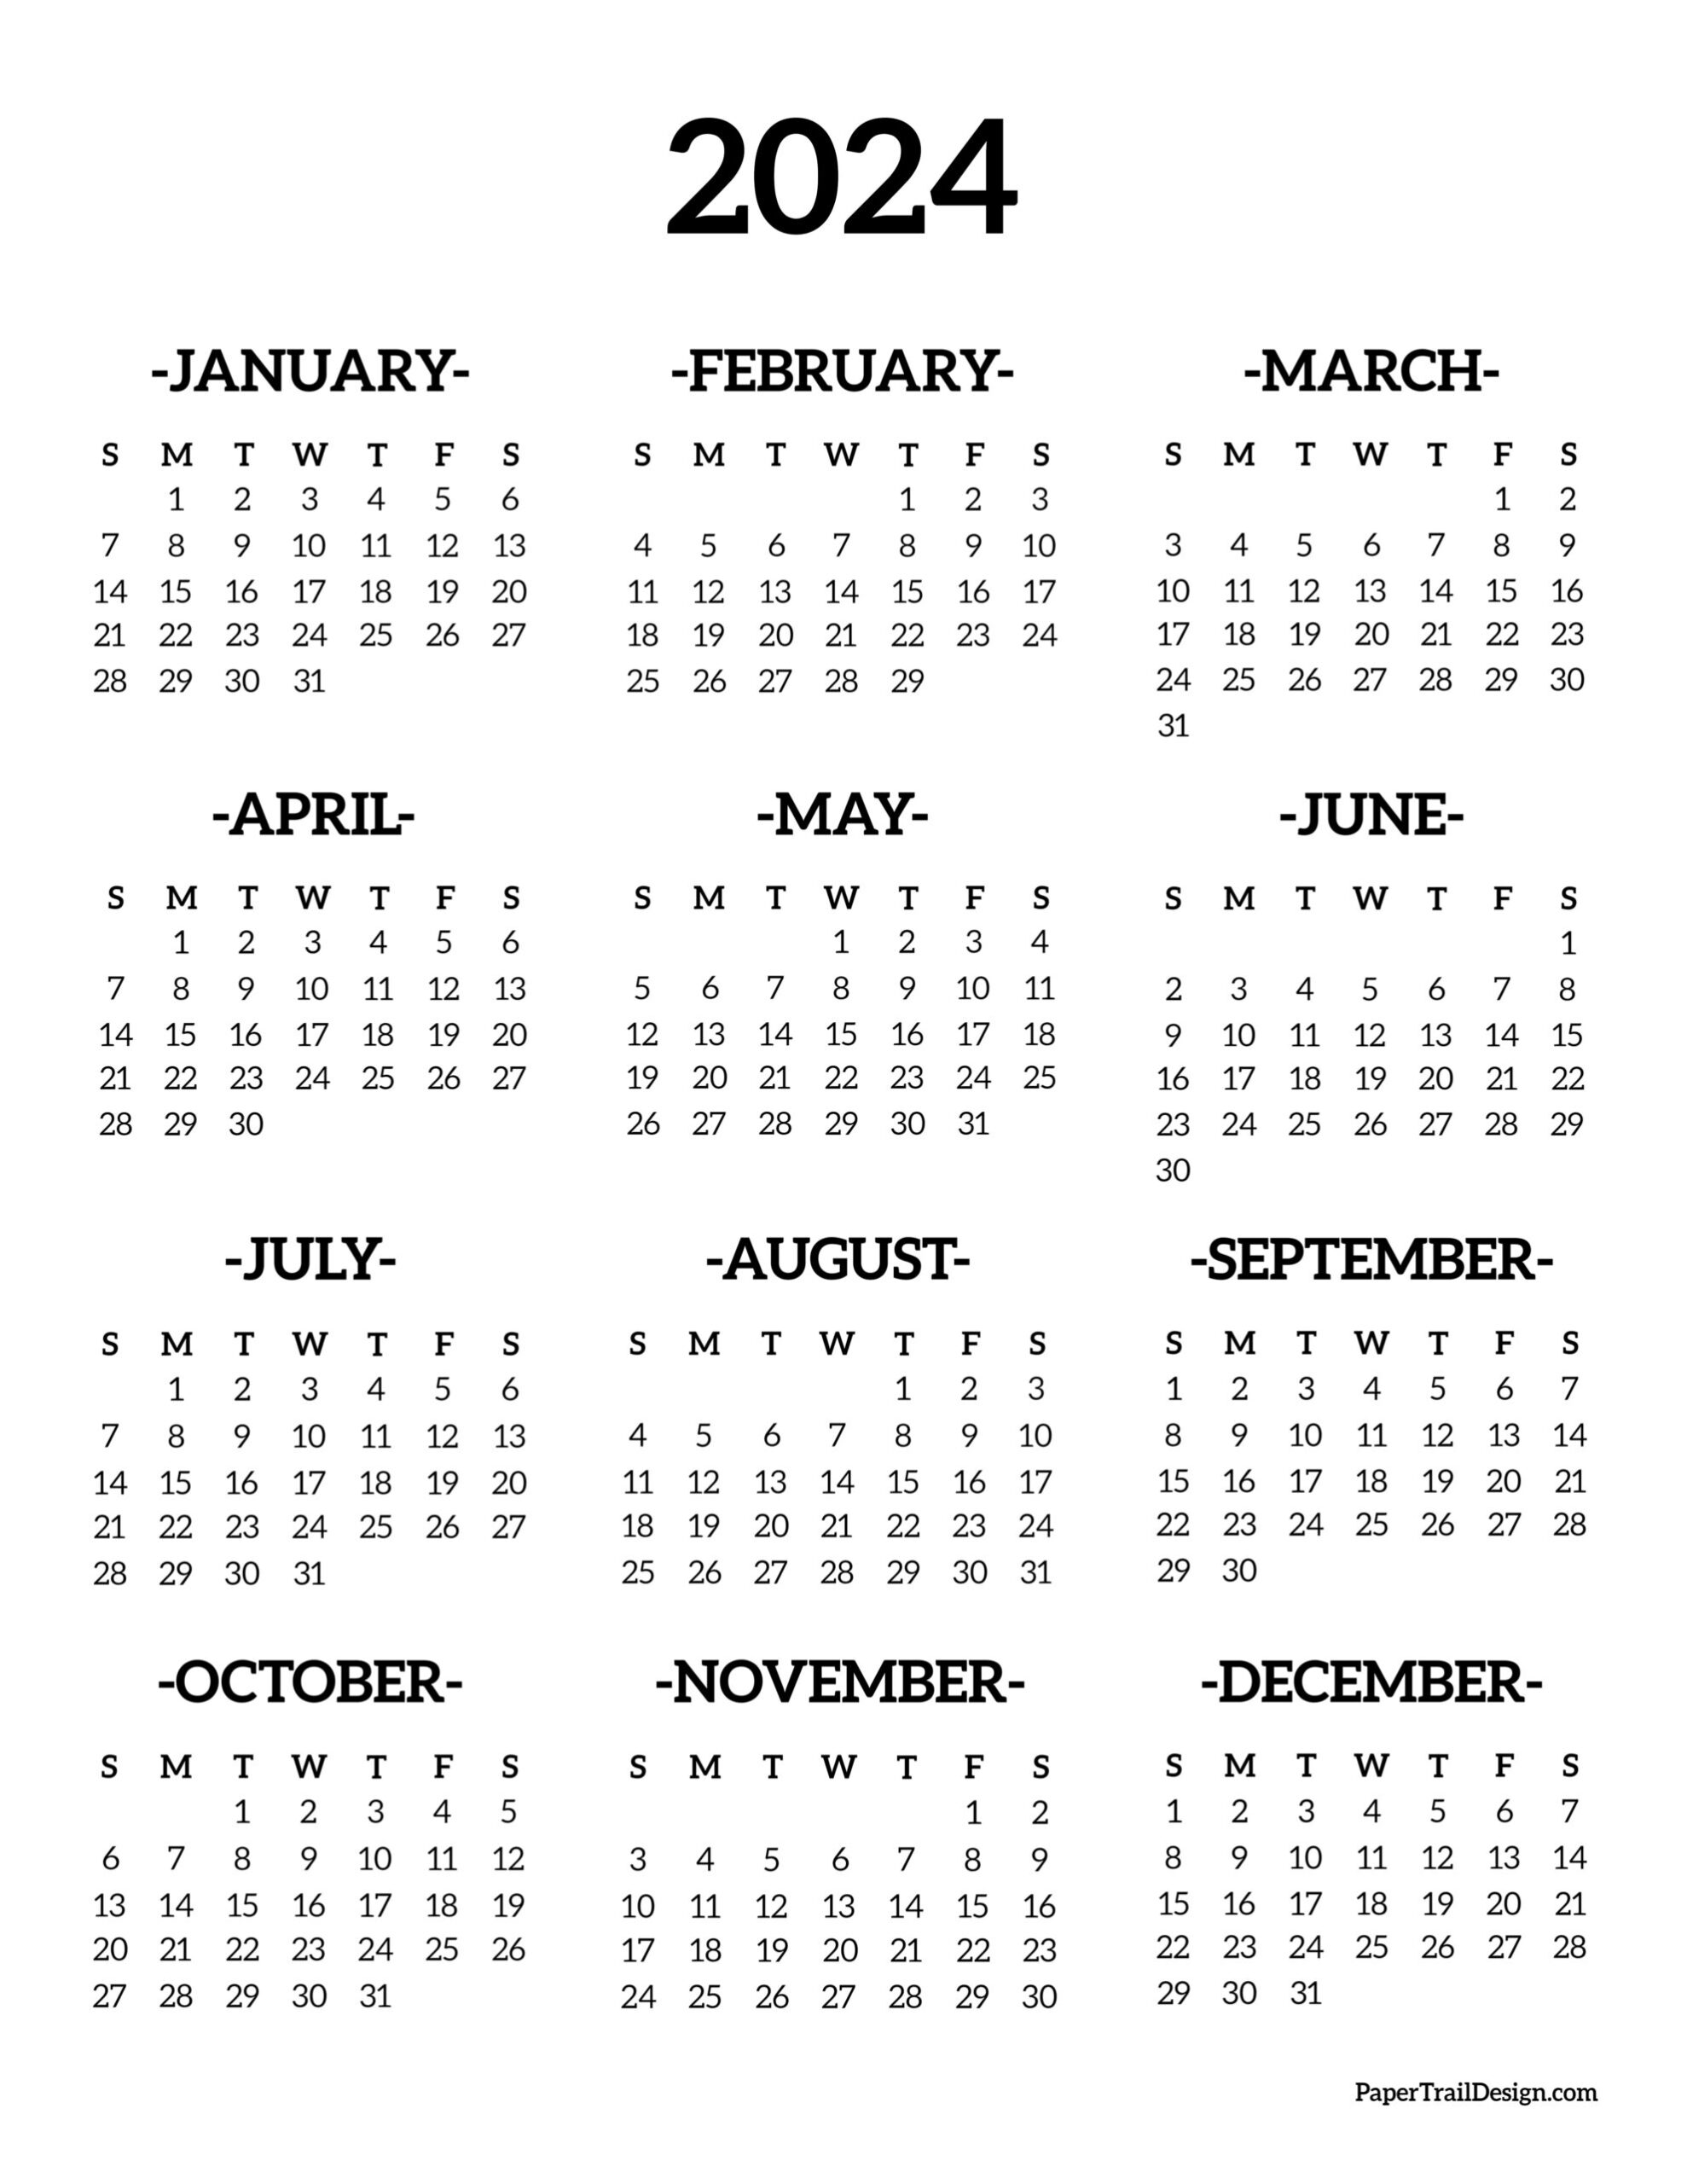 Calendar 2024 Printable One Page - Paper Trail Design for Year Printable Calendar 2024